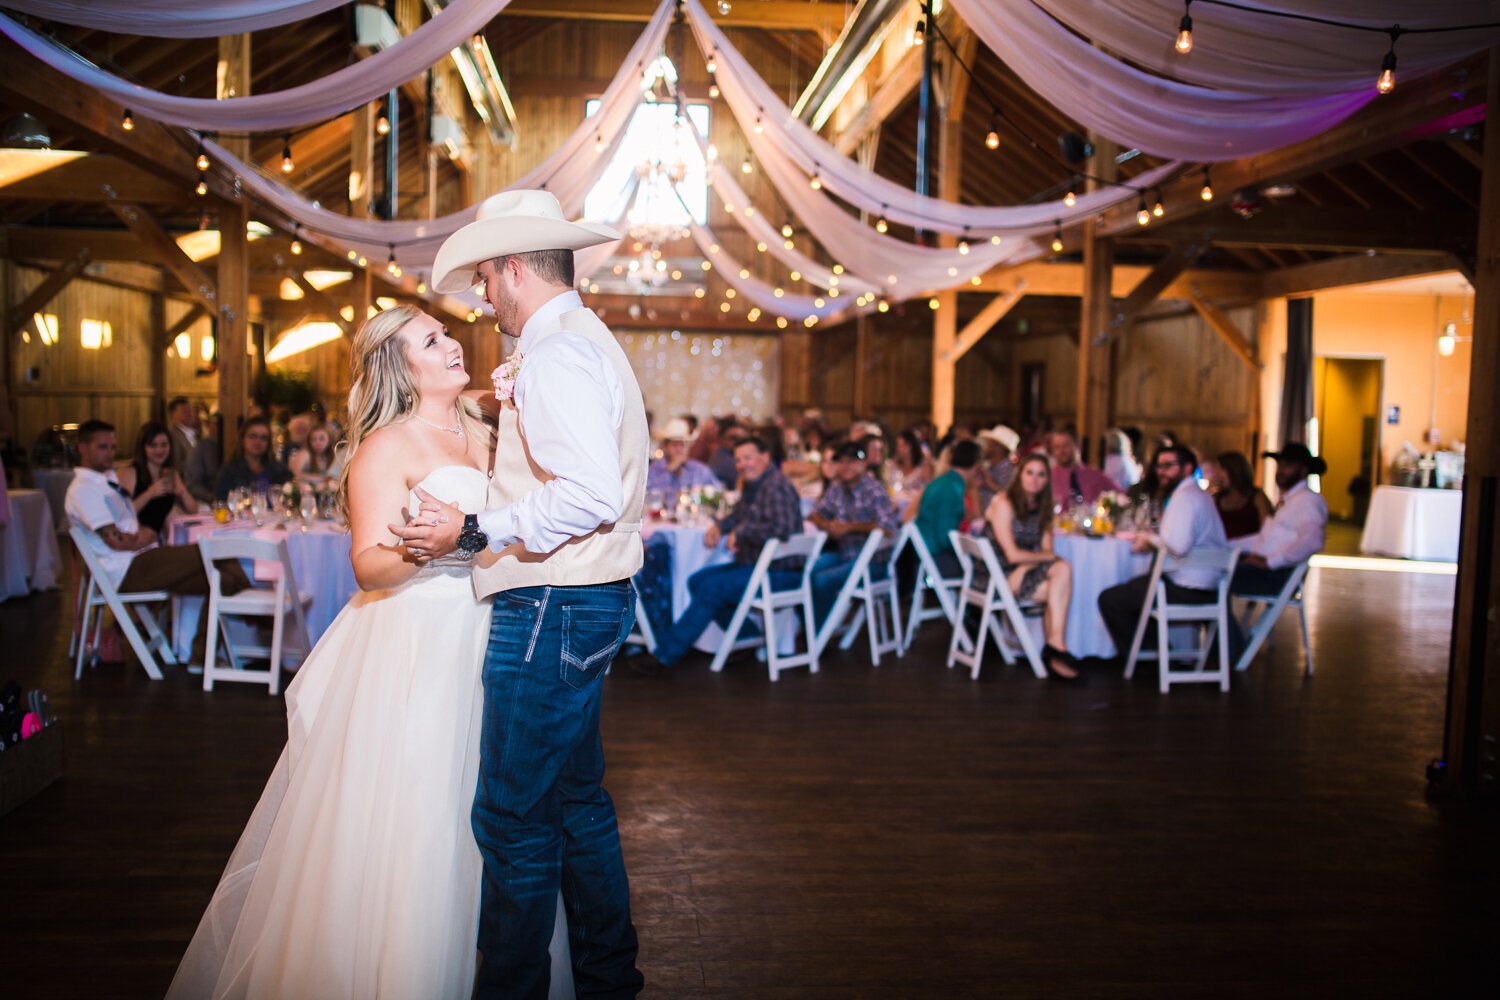  Wedding picture at the Big Red Barn at Highland Meadows Golf Course.&nbsp;Phototgraphed by Jared M. Gant of JMGant Photography.&nbsp; 